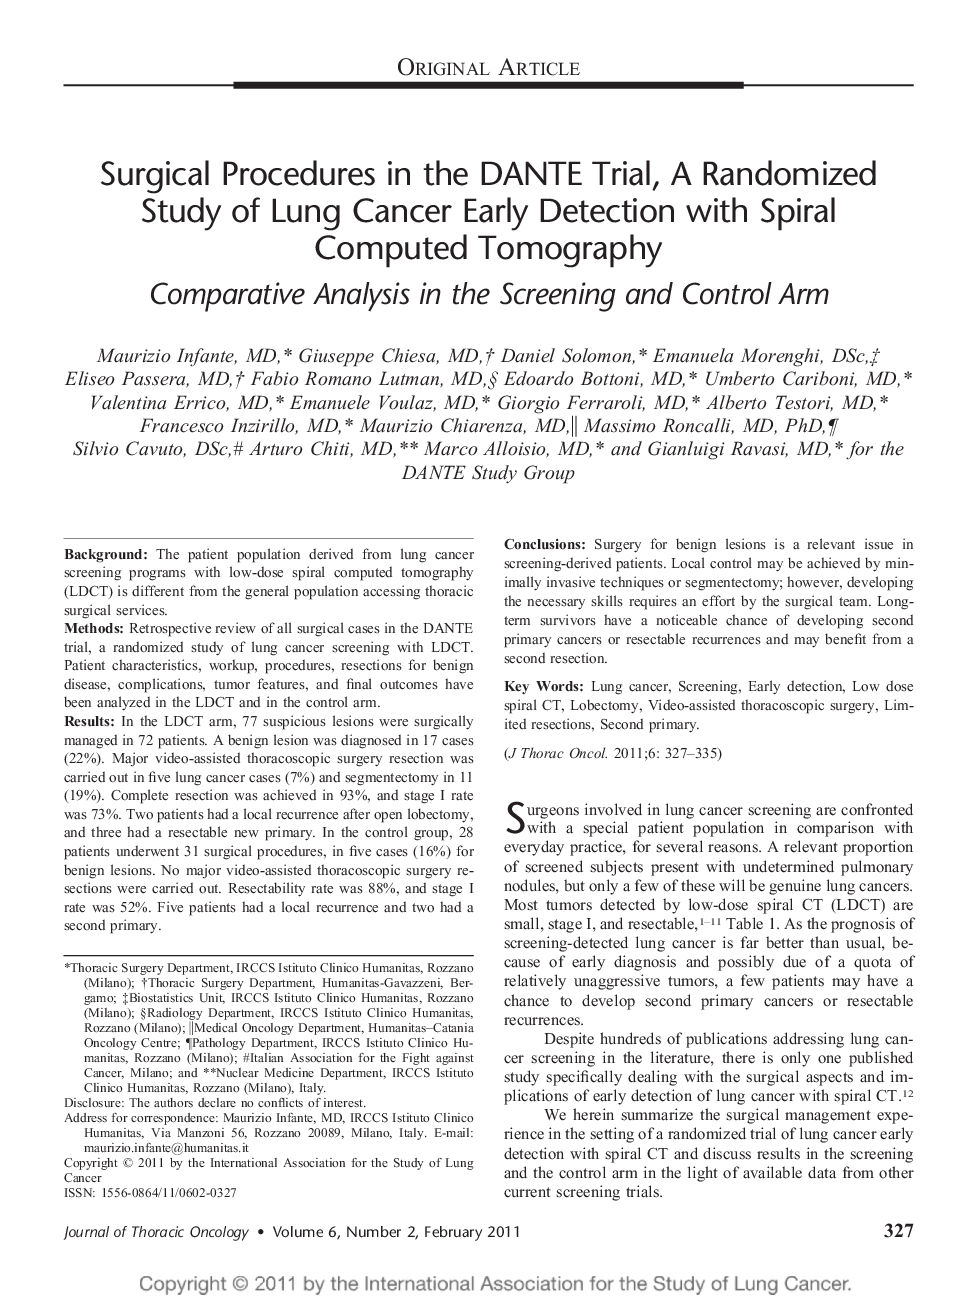 Surgical Procedures in the DANTE Trial, A Randomized Study of Lung Cancer Early Detection with Spiral Computed Tomography: Comparative Analysis in the Screening and Control Arm 